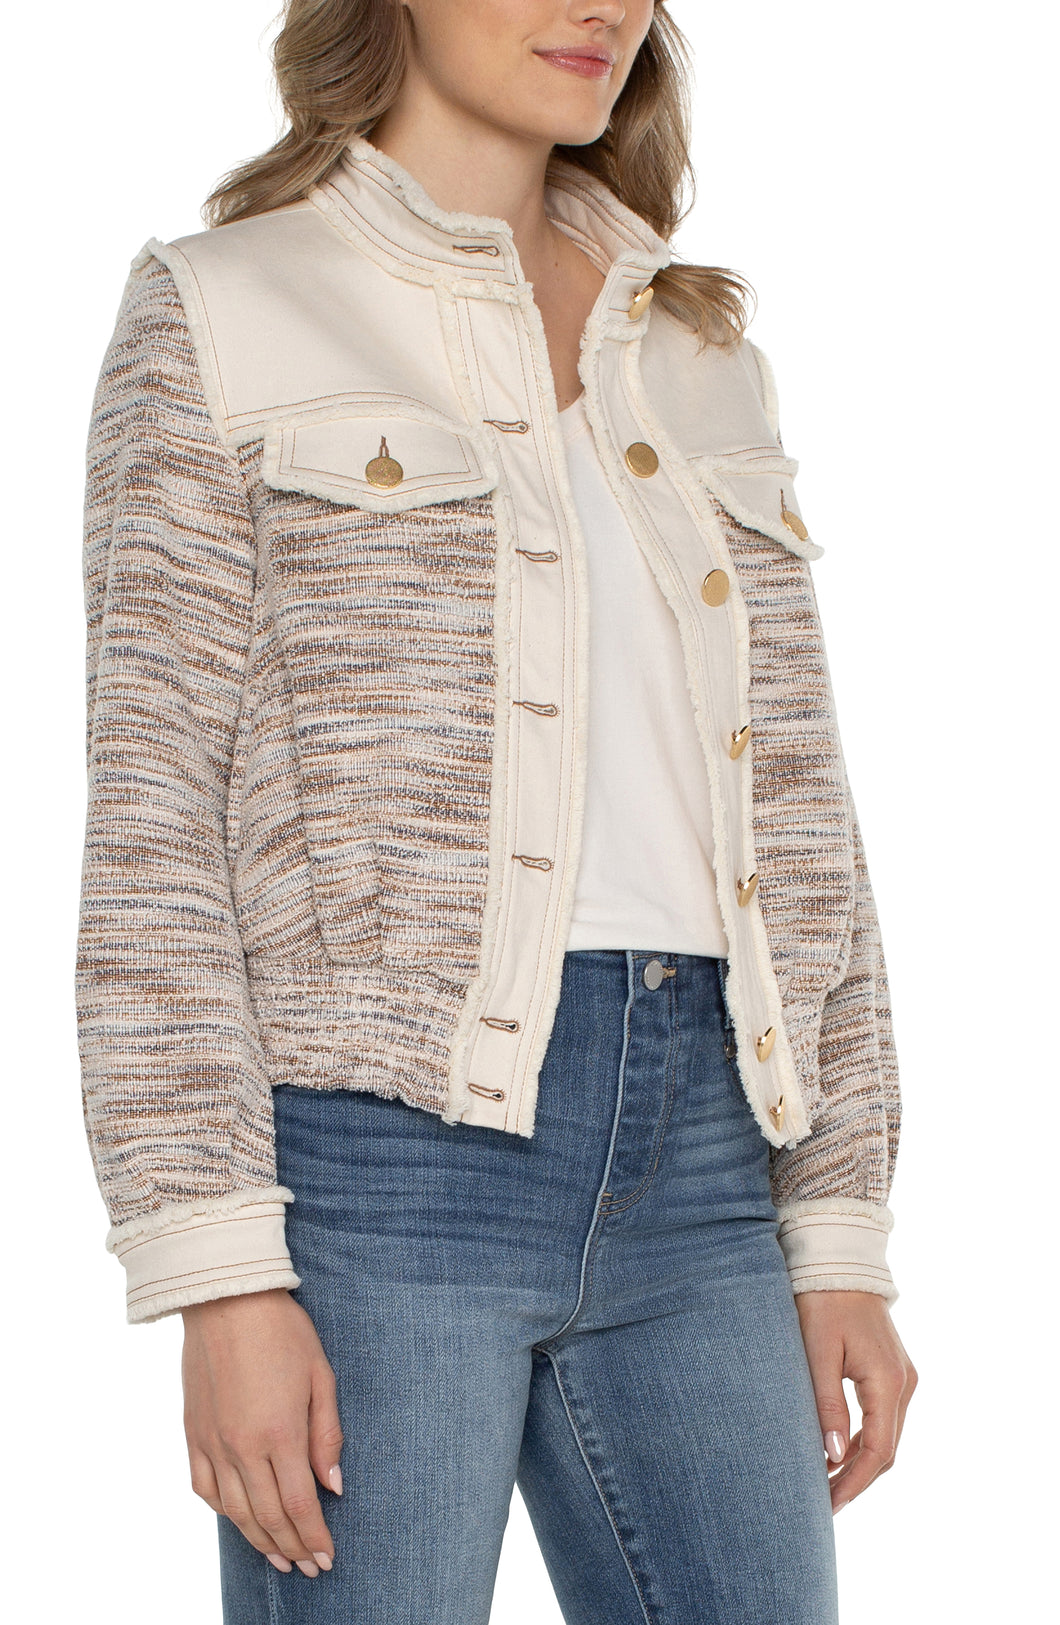 This jacket showcases a stunning combination of slight fray denim and boucle knit. The blend of textures, complemented by the earthy hues and gold metallic accents, creates a distinctive and adaptable garment that will surely be a go-to choice for your wardrobe.  Color- Ecru Multi Boucle. 23-1/2